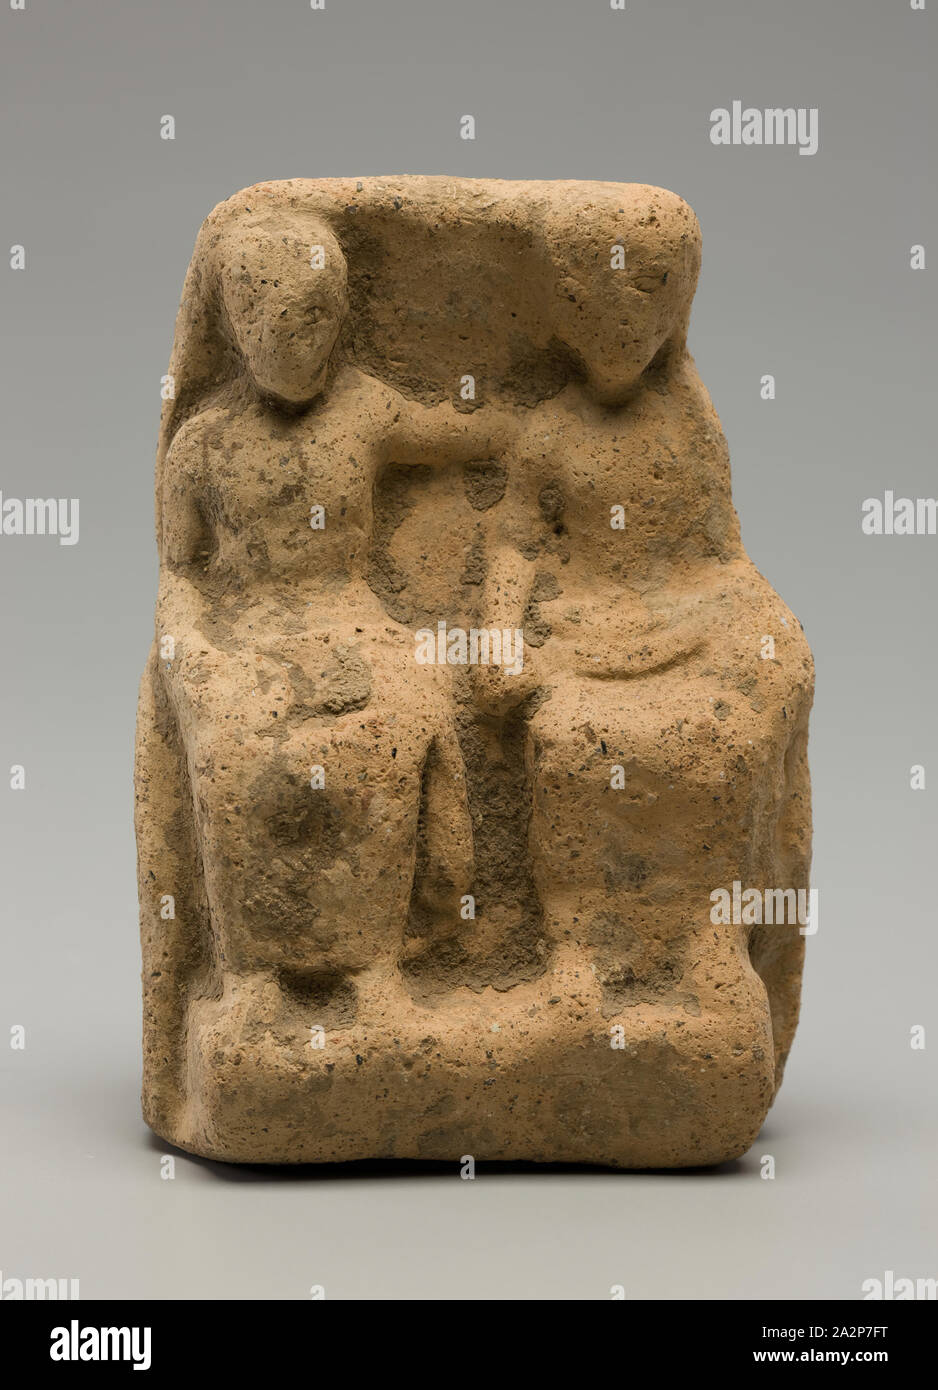 possibly Etruscan, possibly Italic, Seated Couple, 3rd or early 2nd century BCE, Terracotta, Overall: 4 1/4 × 3 × 1 7/8 inches (10.8 × 7.6 × 4.8 cm Stock Photo